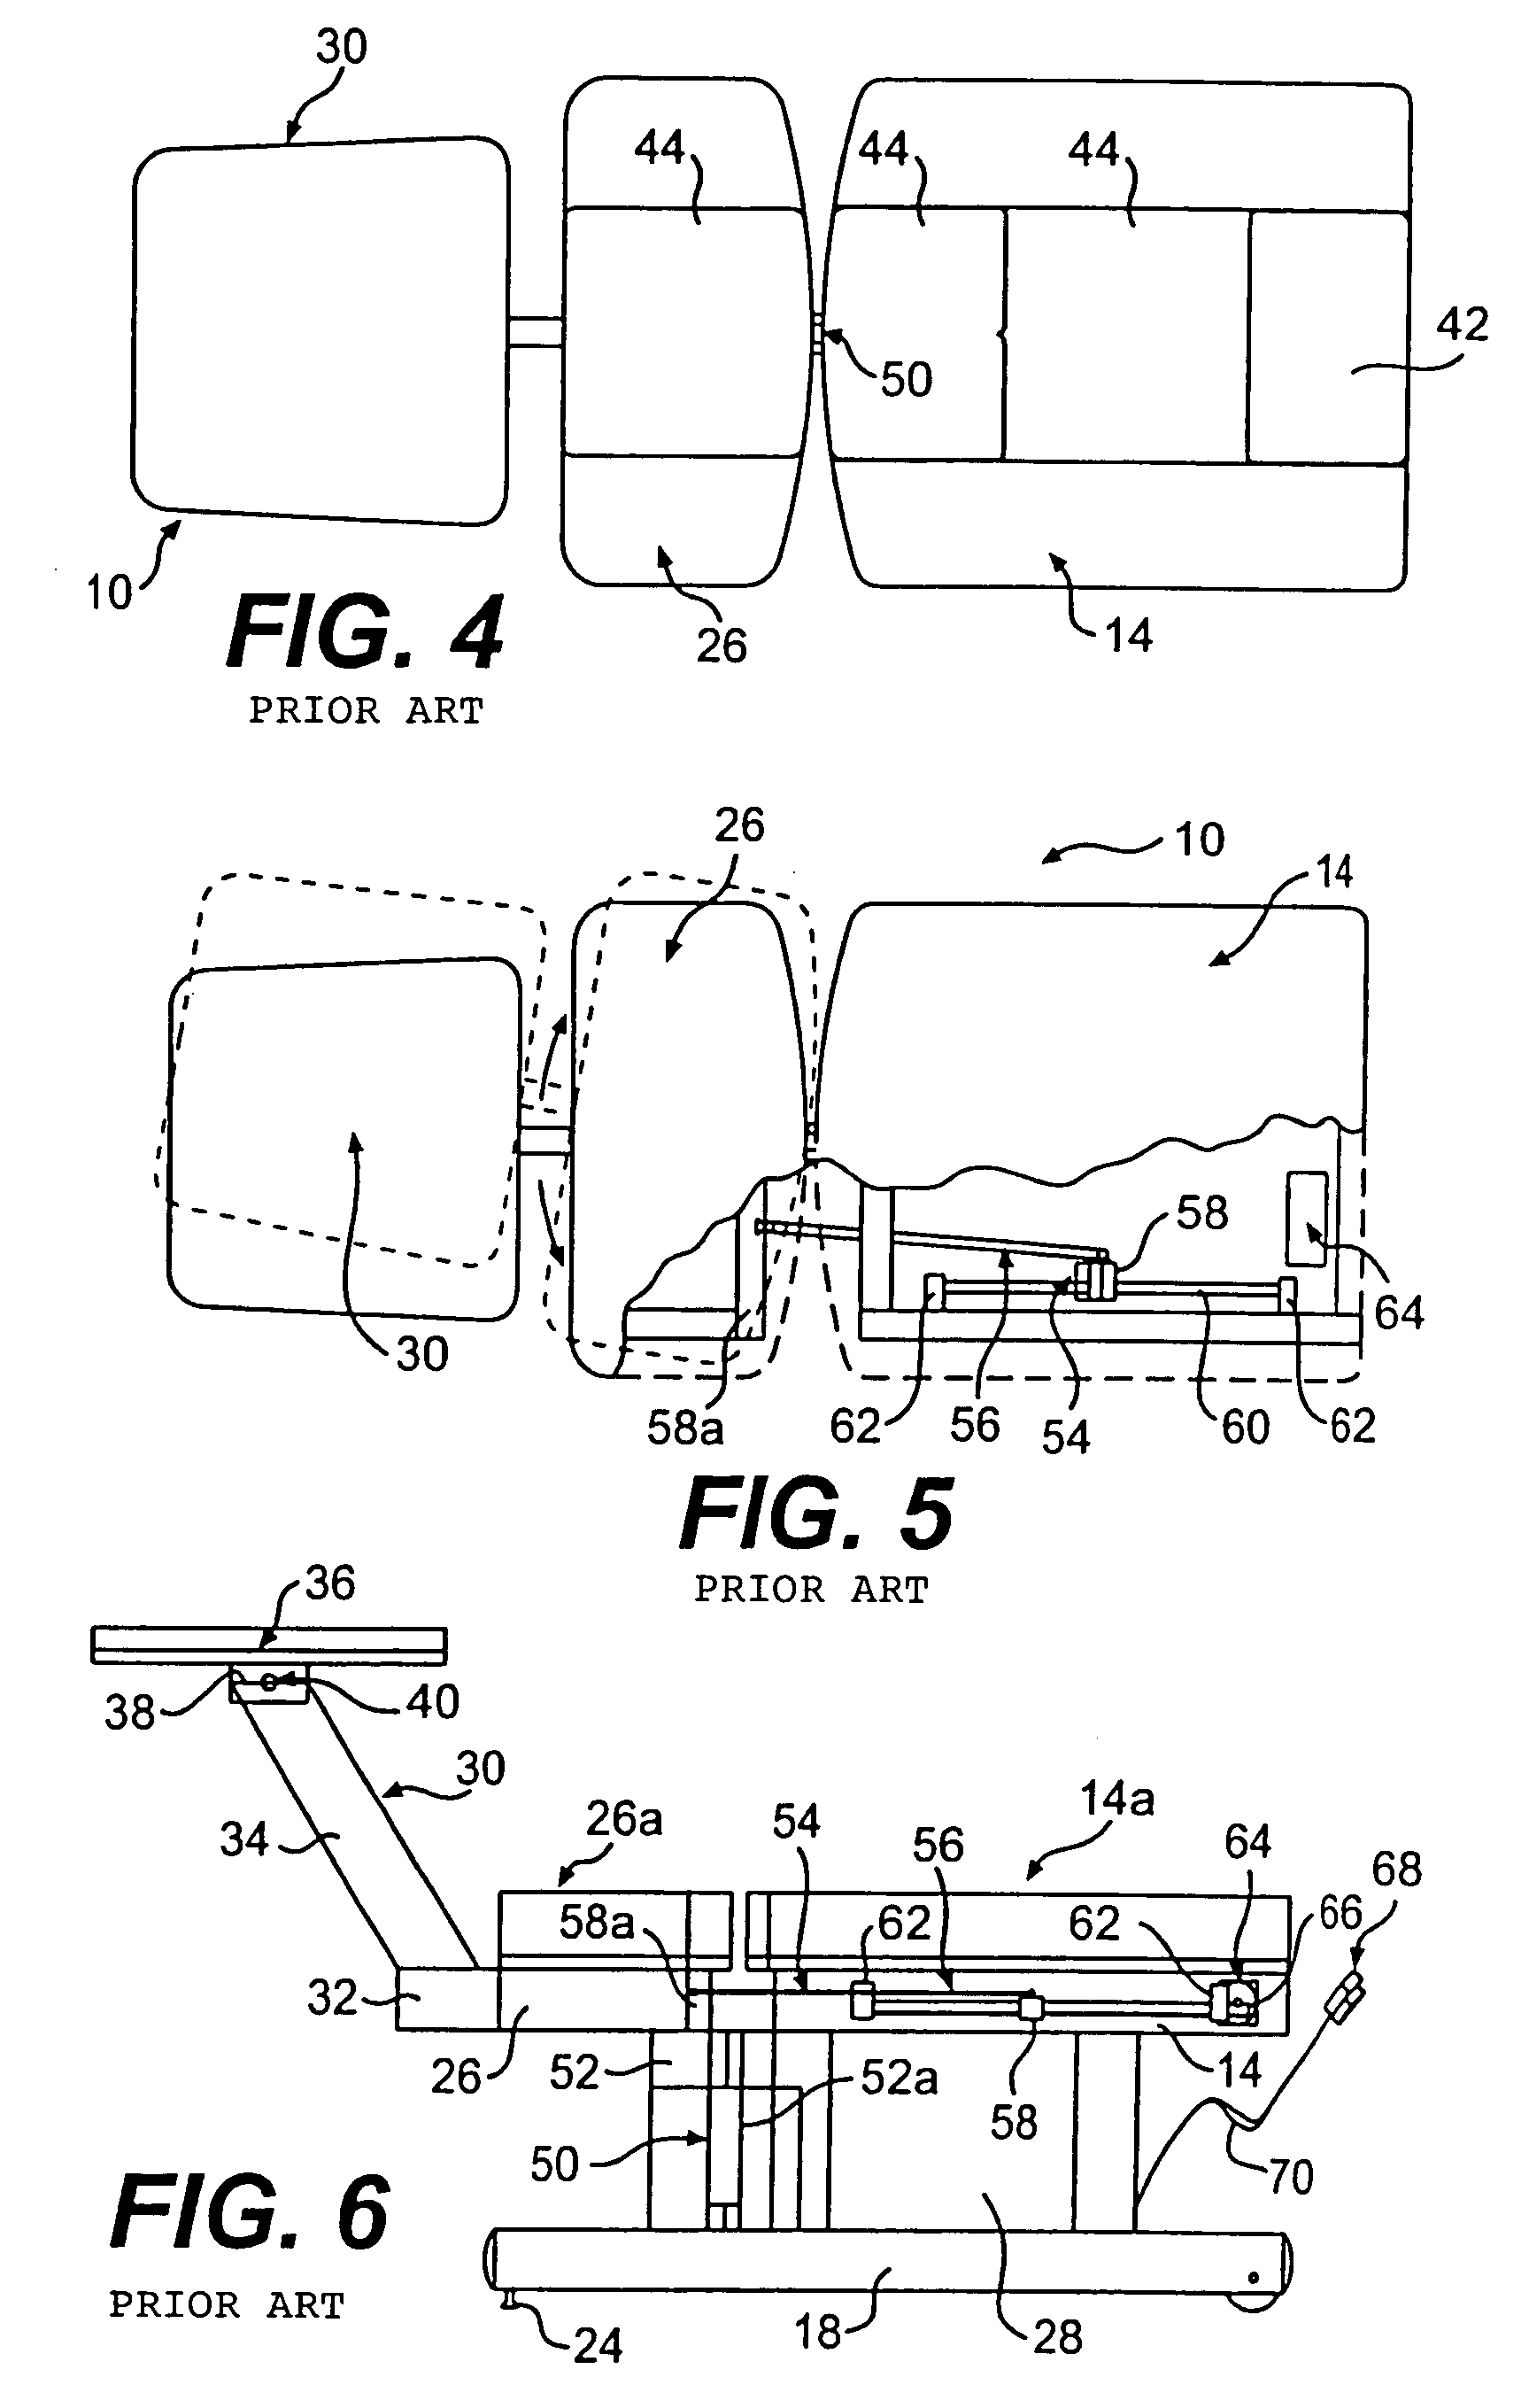 Passive motion machine providing controlled body motions for exercise and therapeutic purposes